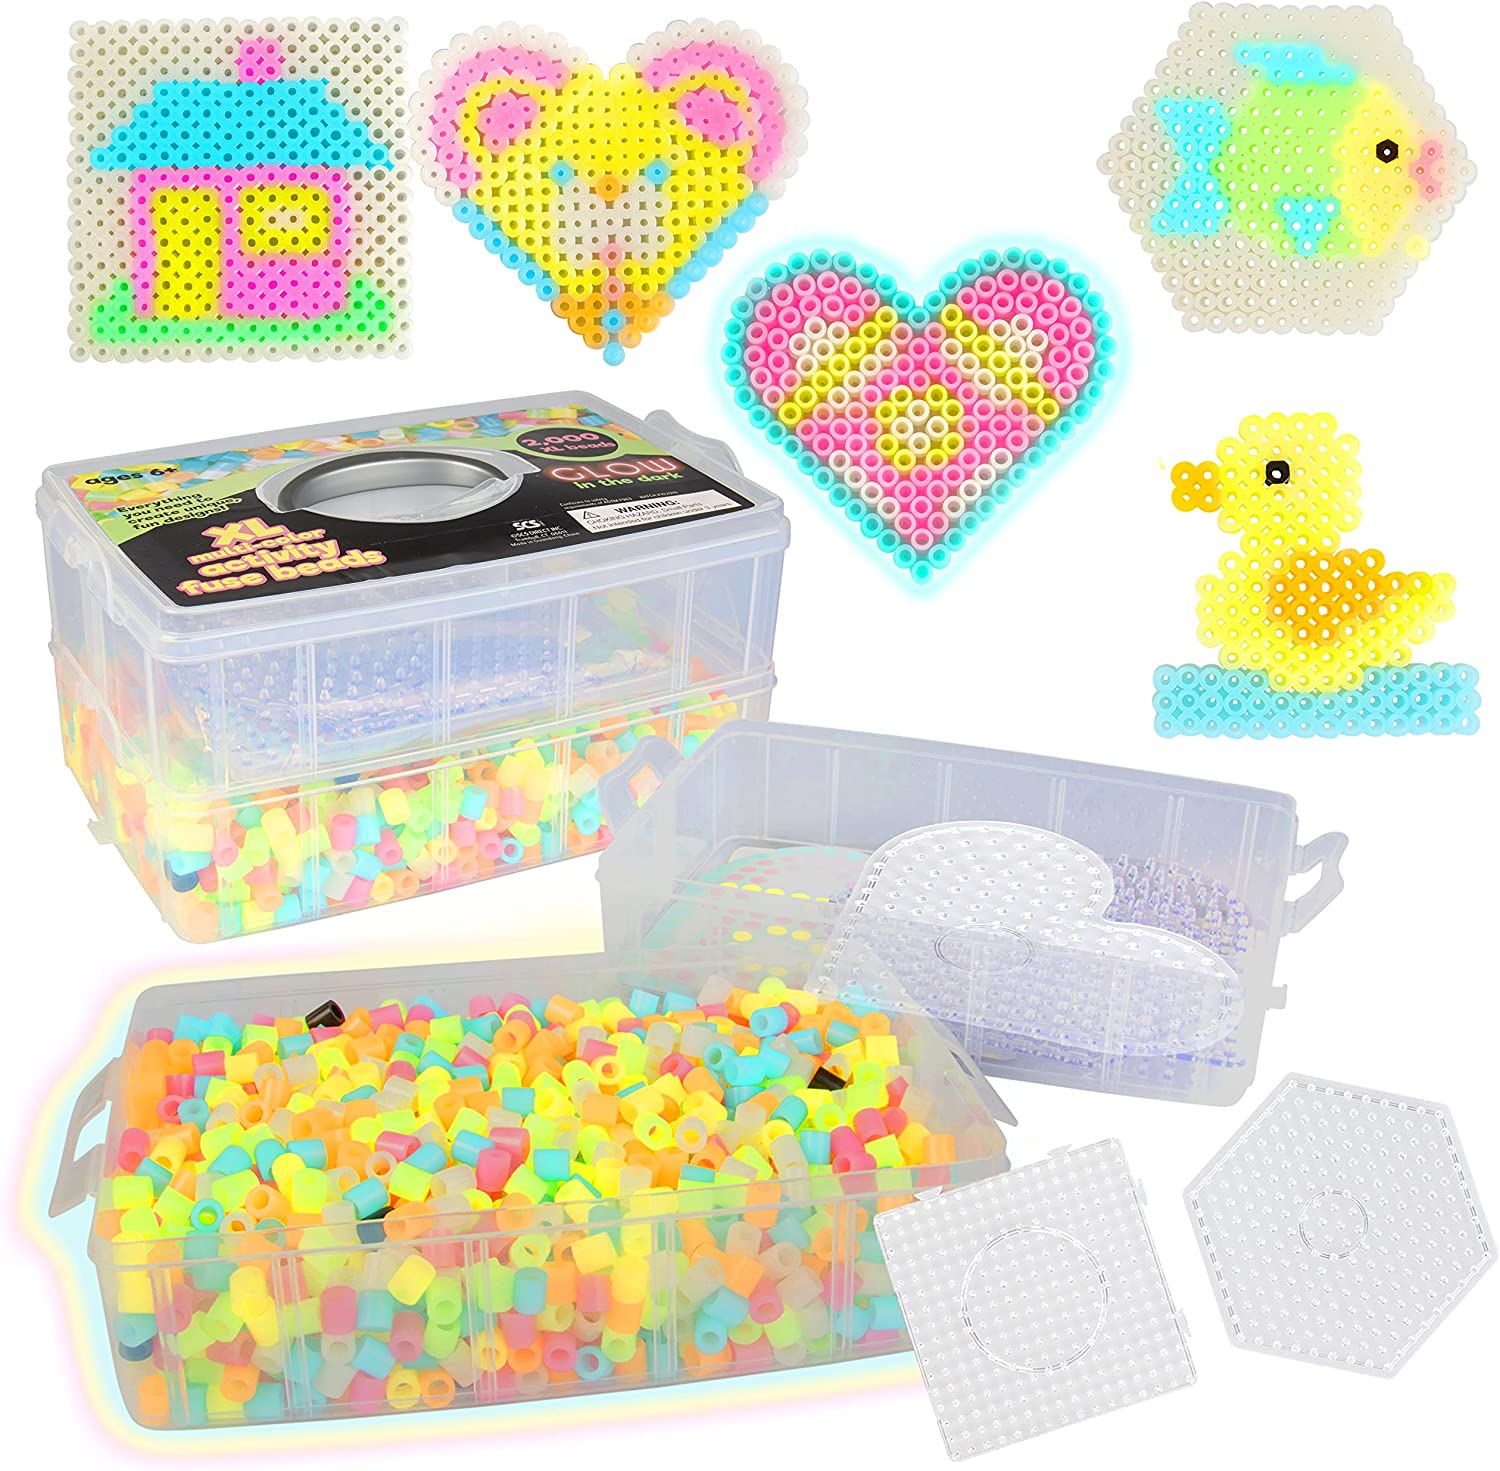 2,000 Piece Glow in The Dark XL Biggie Fuse Halloween Craft Bead Kit- 3 XL Pegboards, 7 Colors, 6 Unique Templates, Ironing Paper and Case - Works